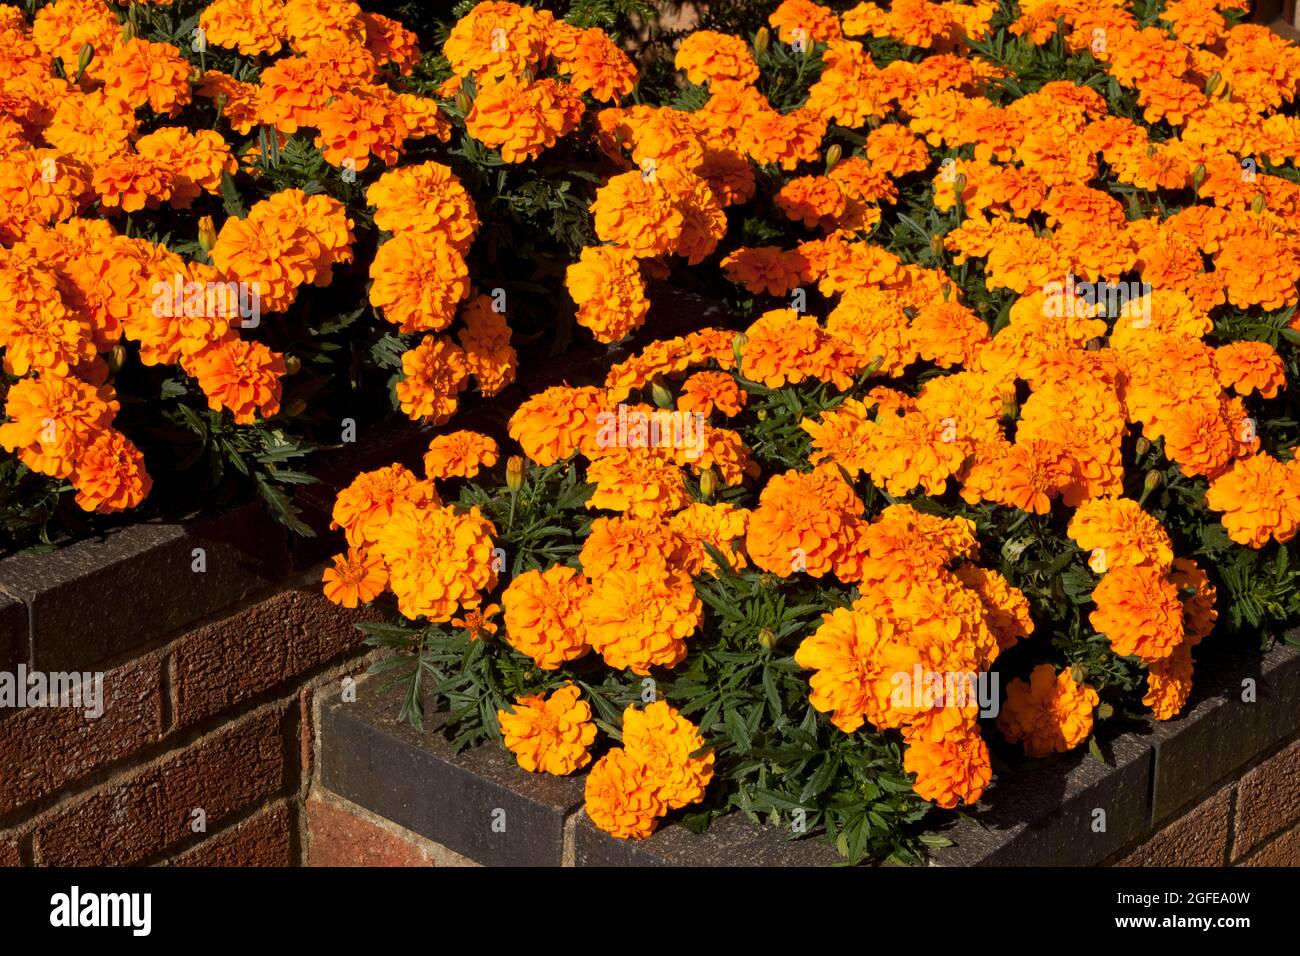 Raised Flower Bed full of Marigolds on a Patio Stock Photo